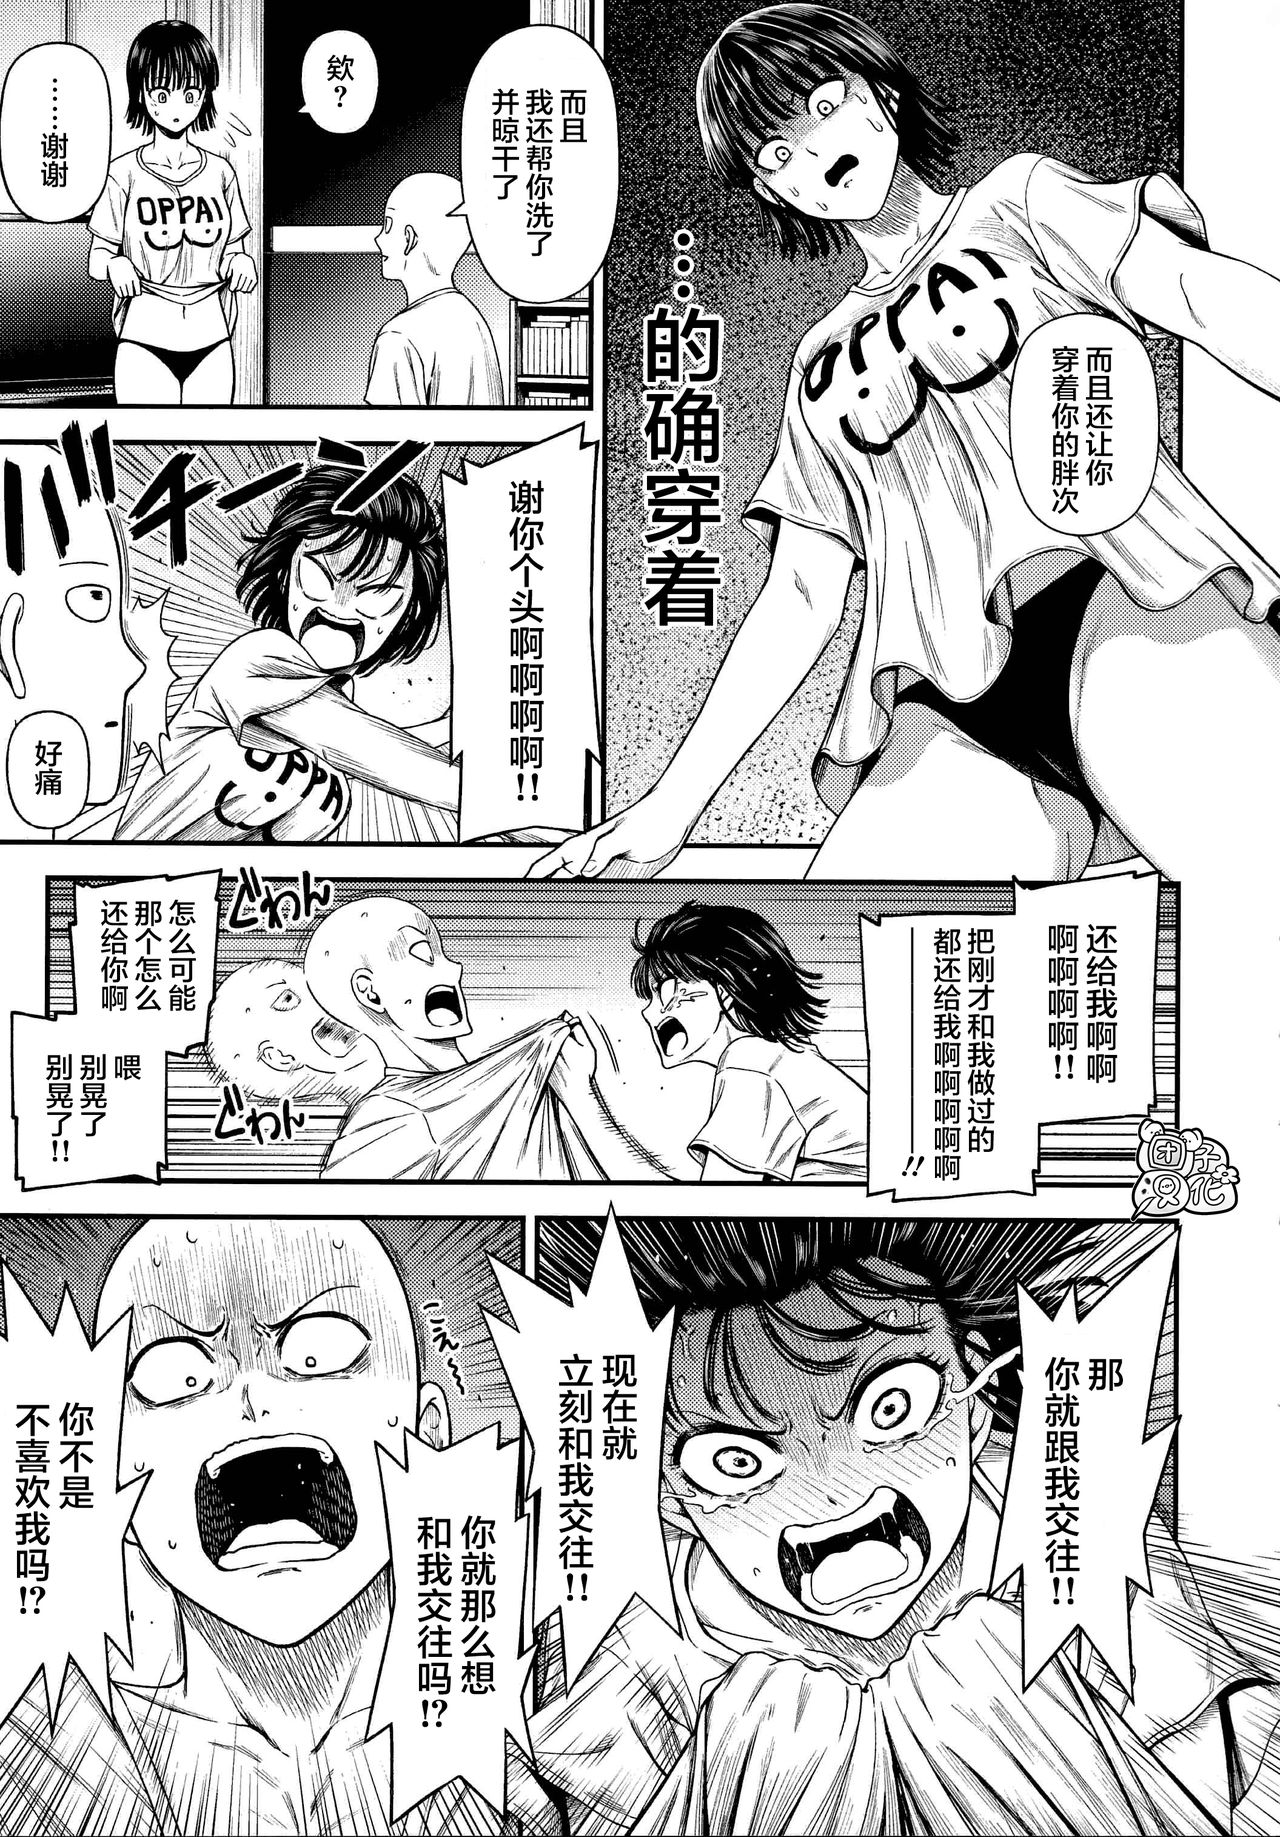 [Kiyosumi Hurricane (Kiyosumi Hurricane)] ONE-HURRICANE (One Punch Man) page 35 full